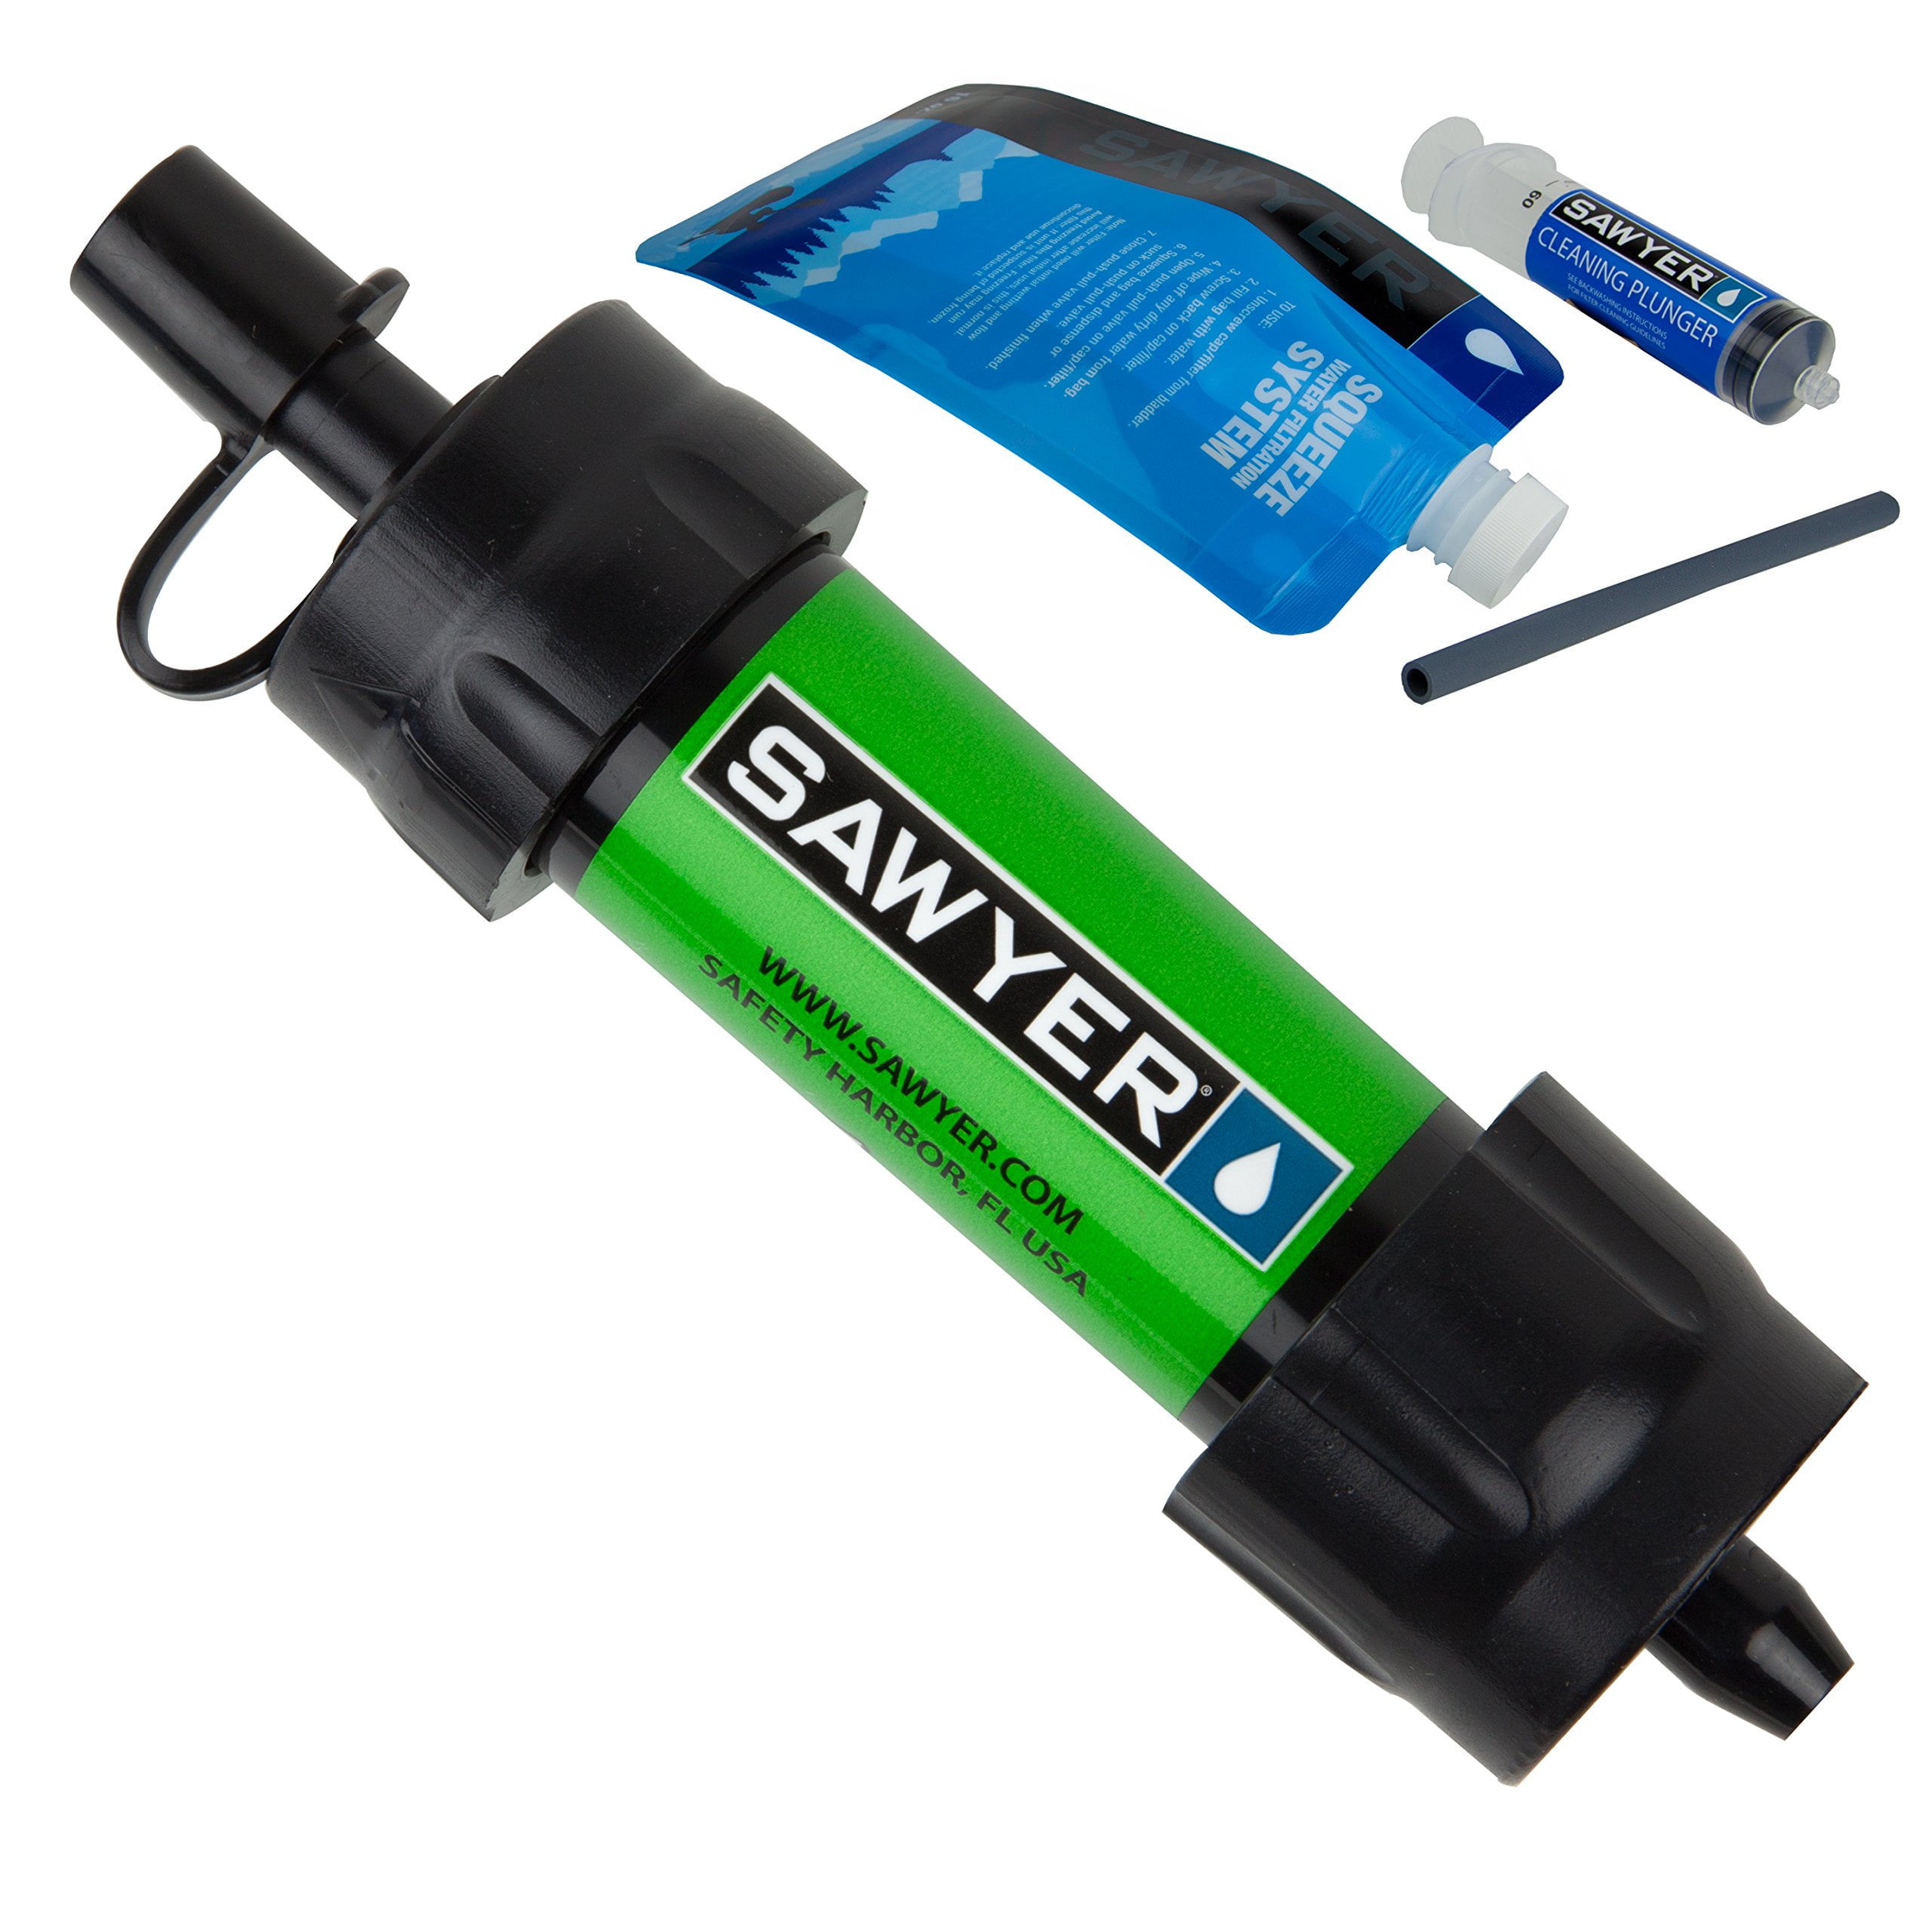 Sawyer MINI Portable Water Filter Survival Purifier Green Filtration System new